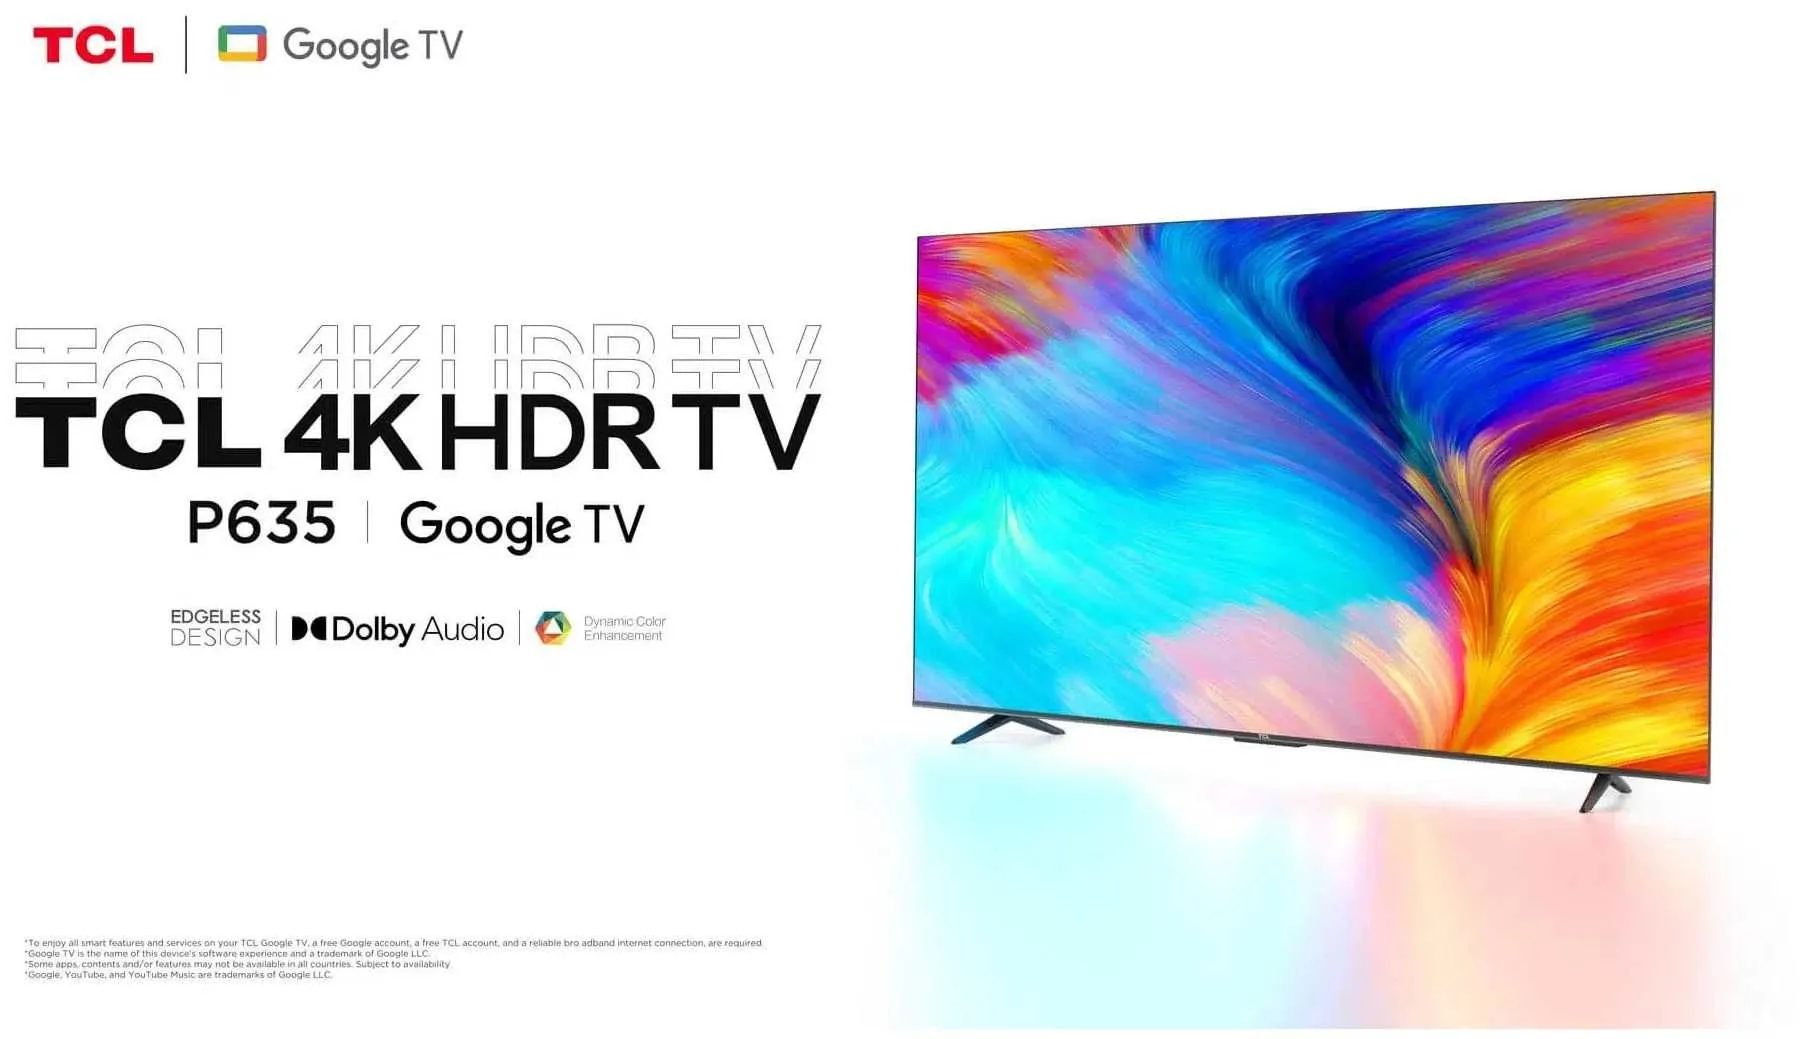 Телевизор TCL 55" 4K LED Smart TV Wi-Fi Android#1